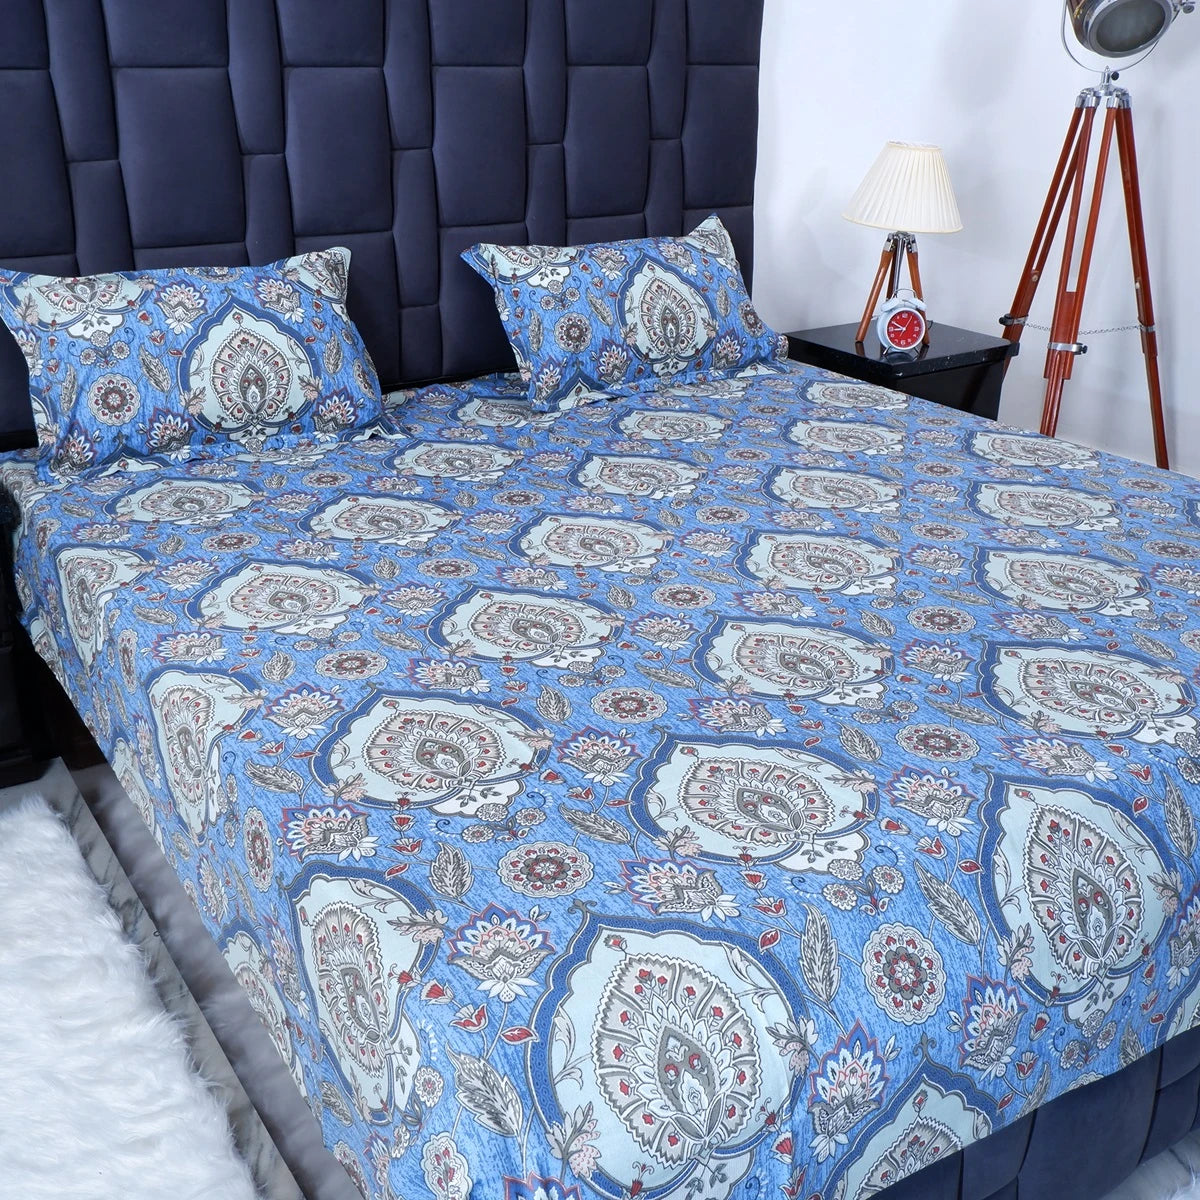 100% Pure Cotton Bed Sheet | Soft Blue Luxury Bed